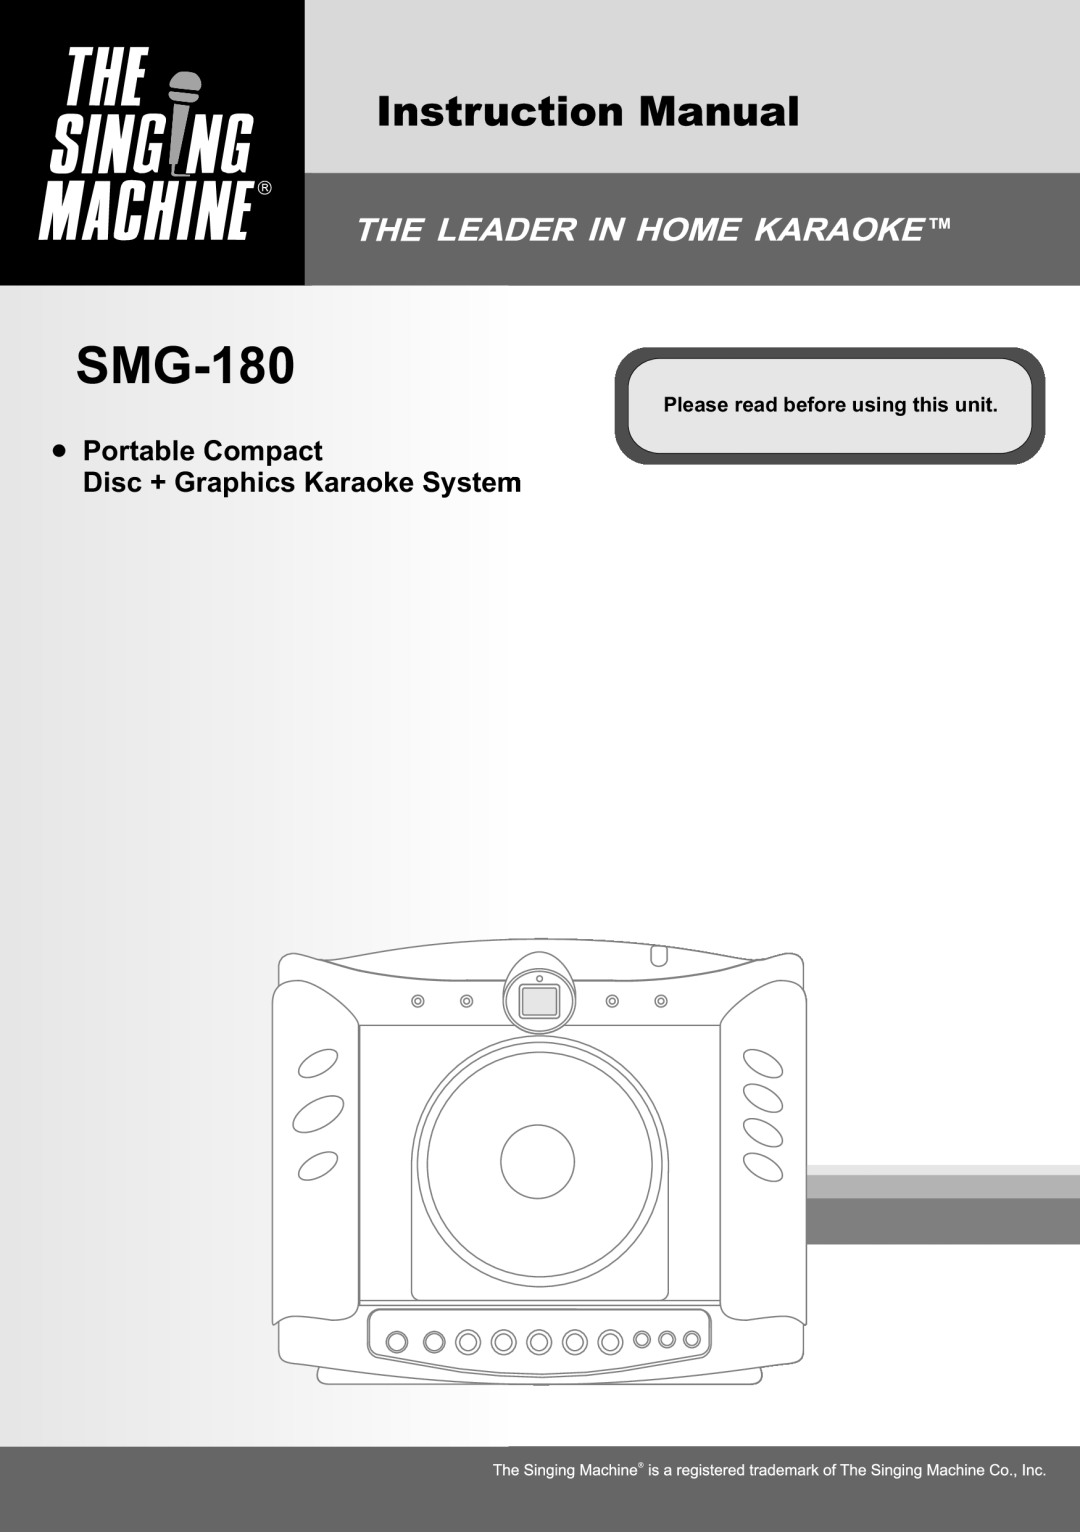 The Singing Machine SMG-180 manual Portable Compact Disc + Graphics Karaoke System, Please read before using this unit 